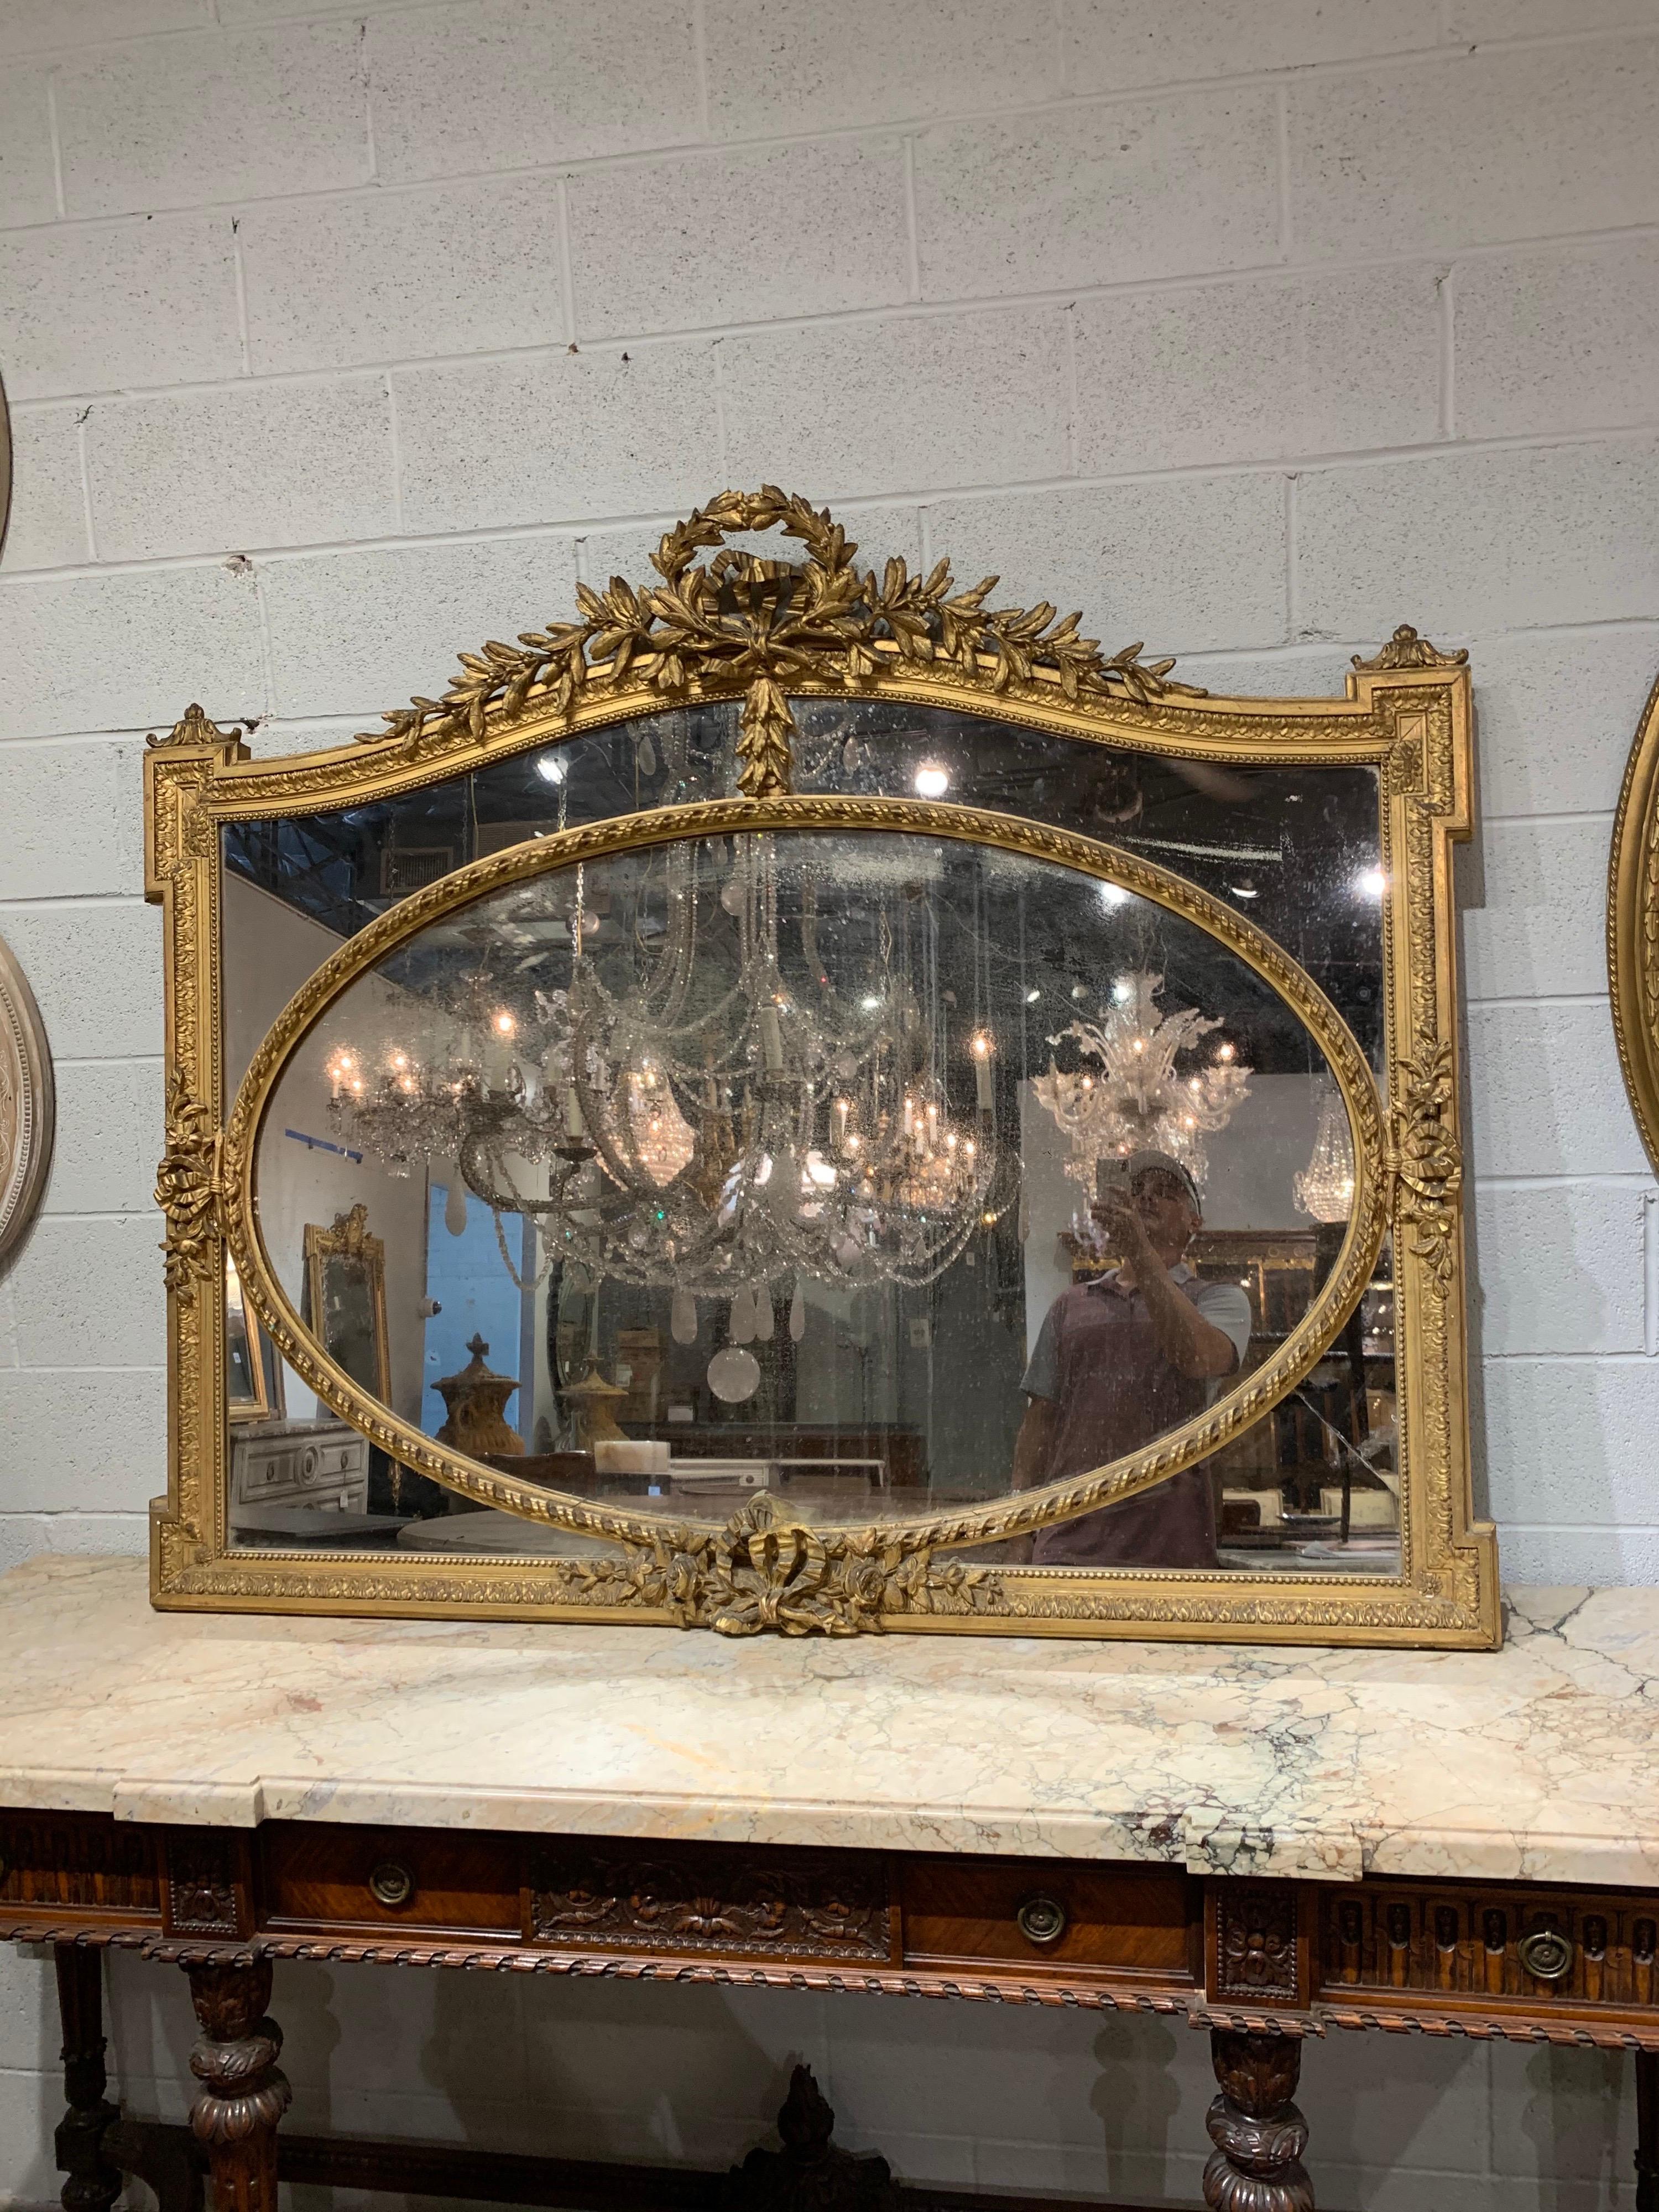 Beautiful decorative 19th century French Louis XVI style giltwood mirror. Outstanding carving and gilt on this piece. A true work of art that is sure to impress!